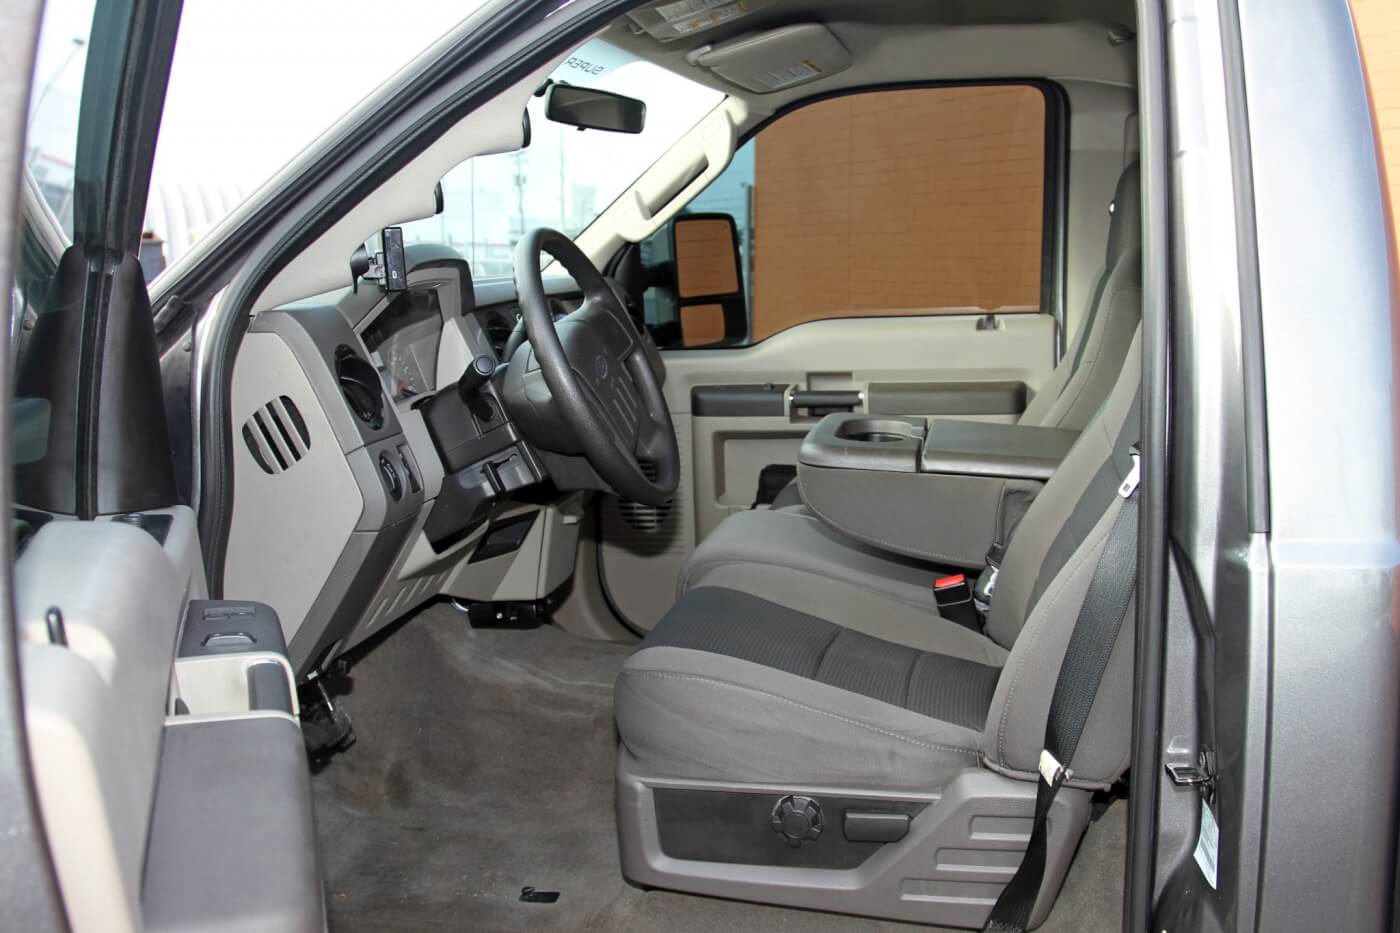 The interior is mostly stock and very clean, a reflection of the low miles on the truck when Lindenberg purchased it.